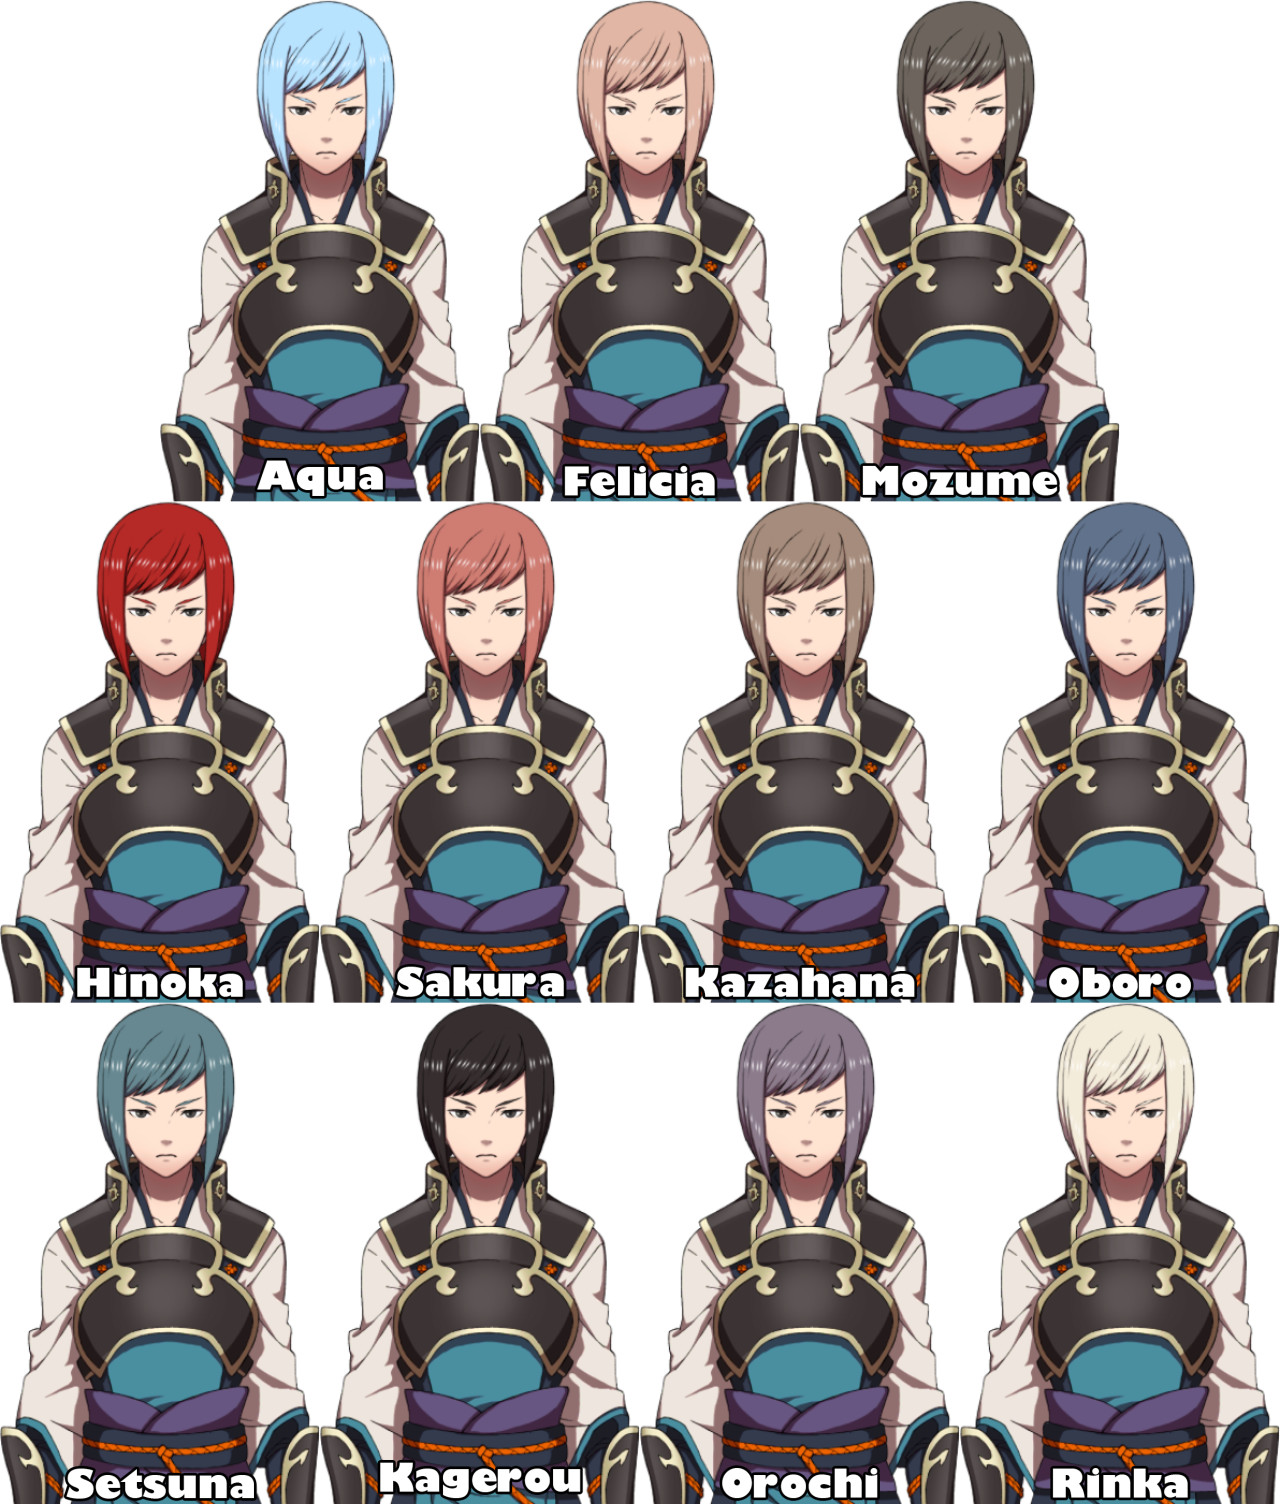 Fire Emblem Awakening Children Hair Color
 Yet another child who looks good with even the oddest hair